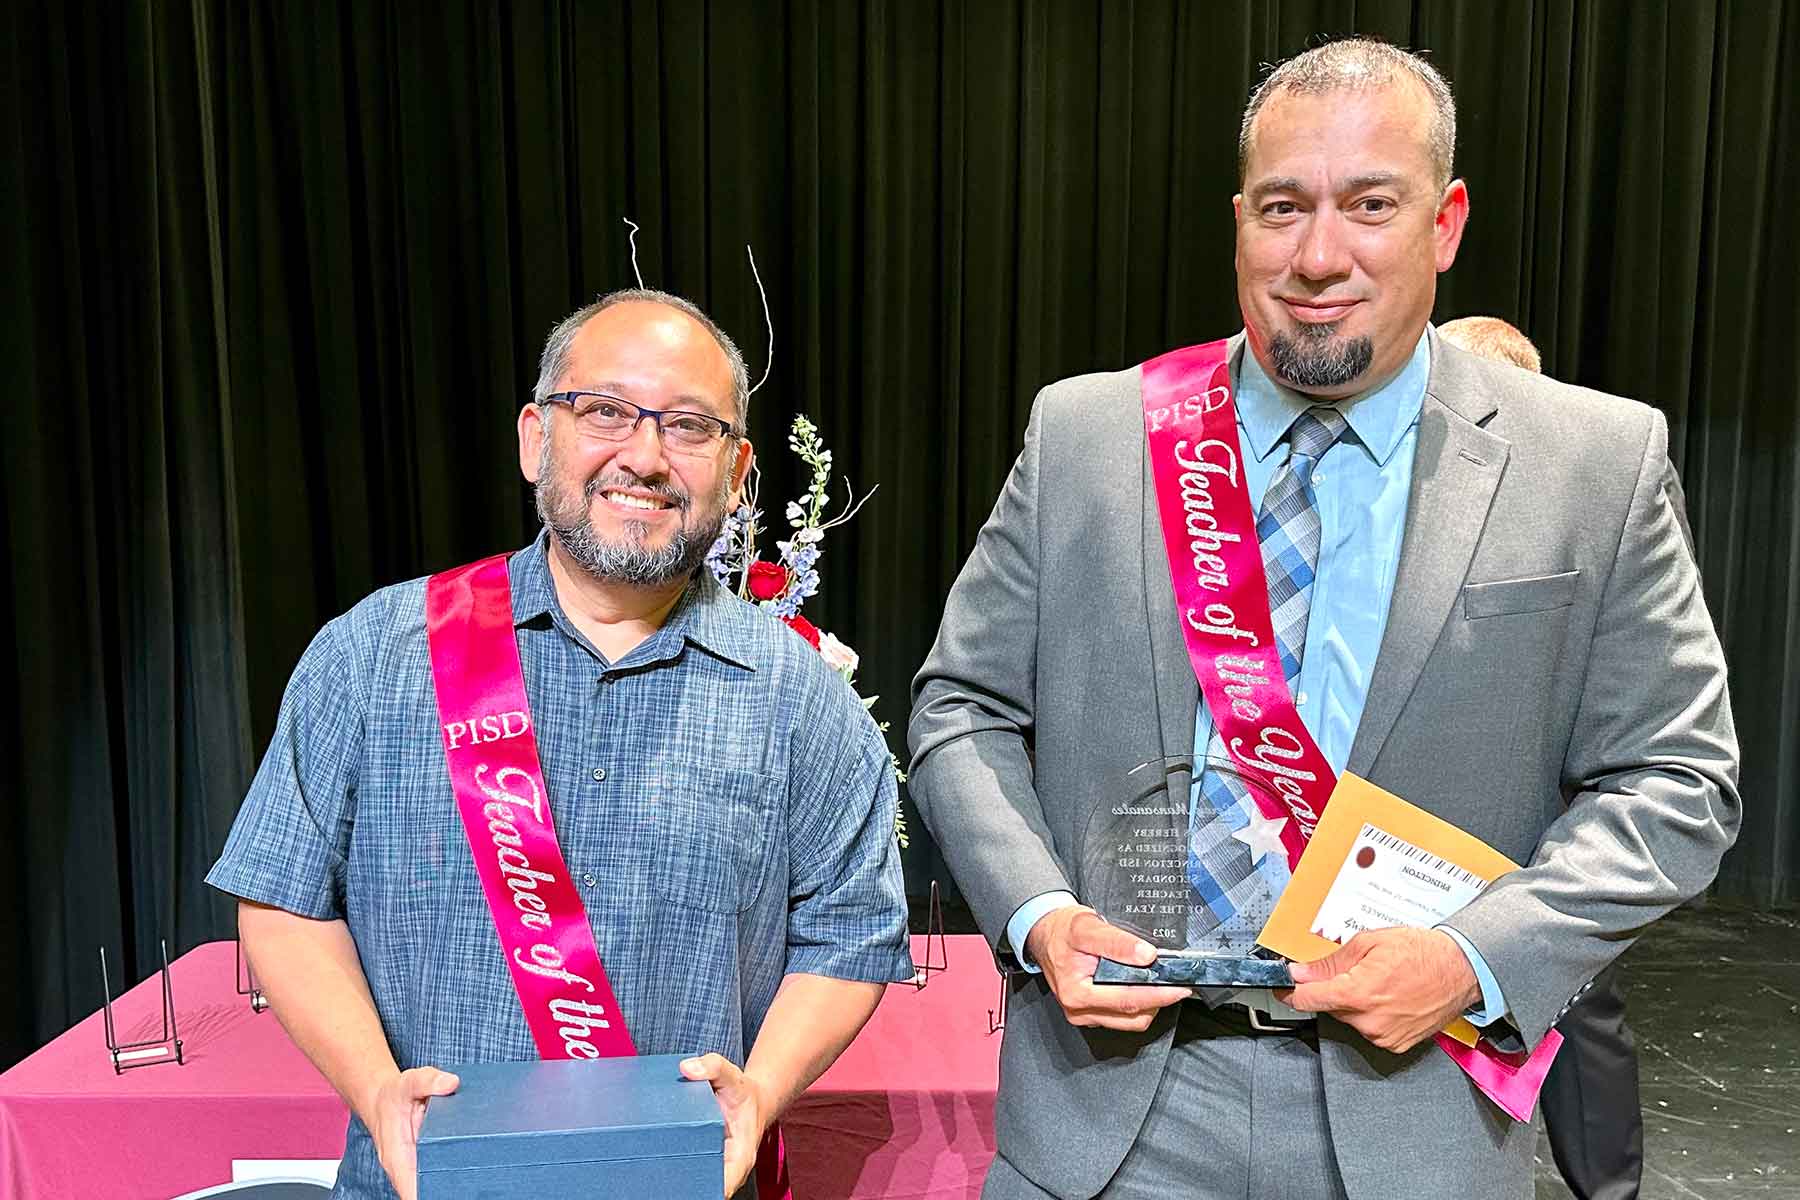 District honors top secondary, elementary teachers with banquet